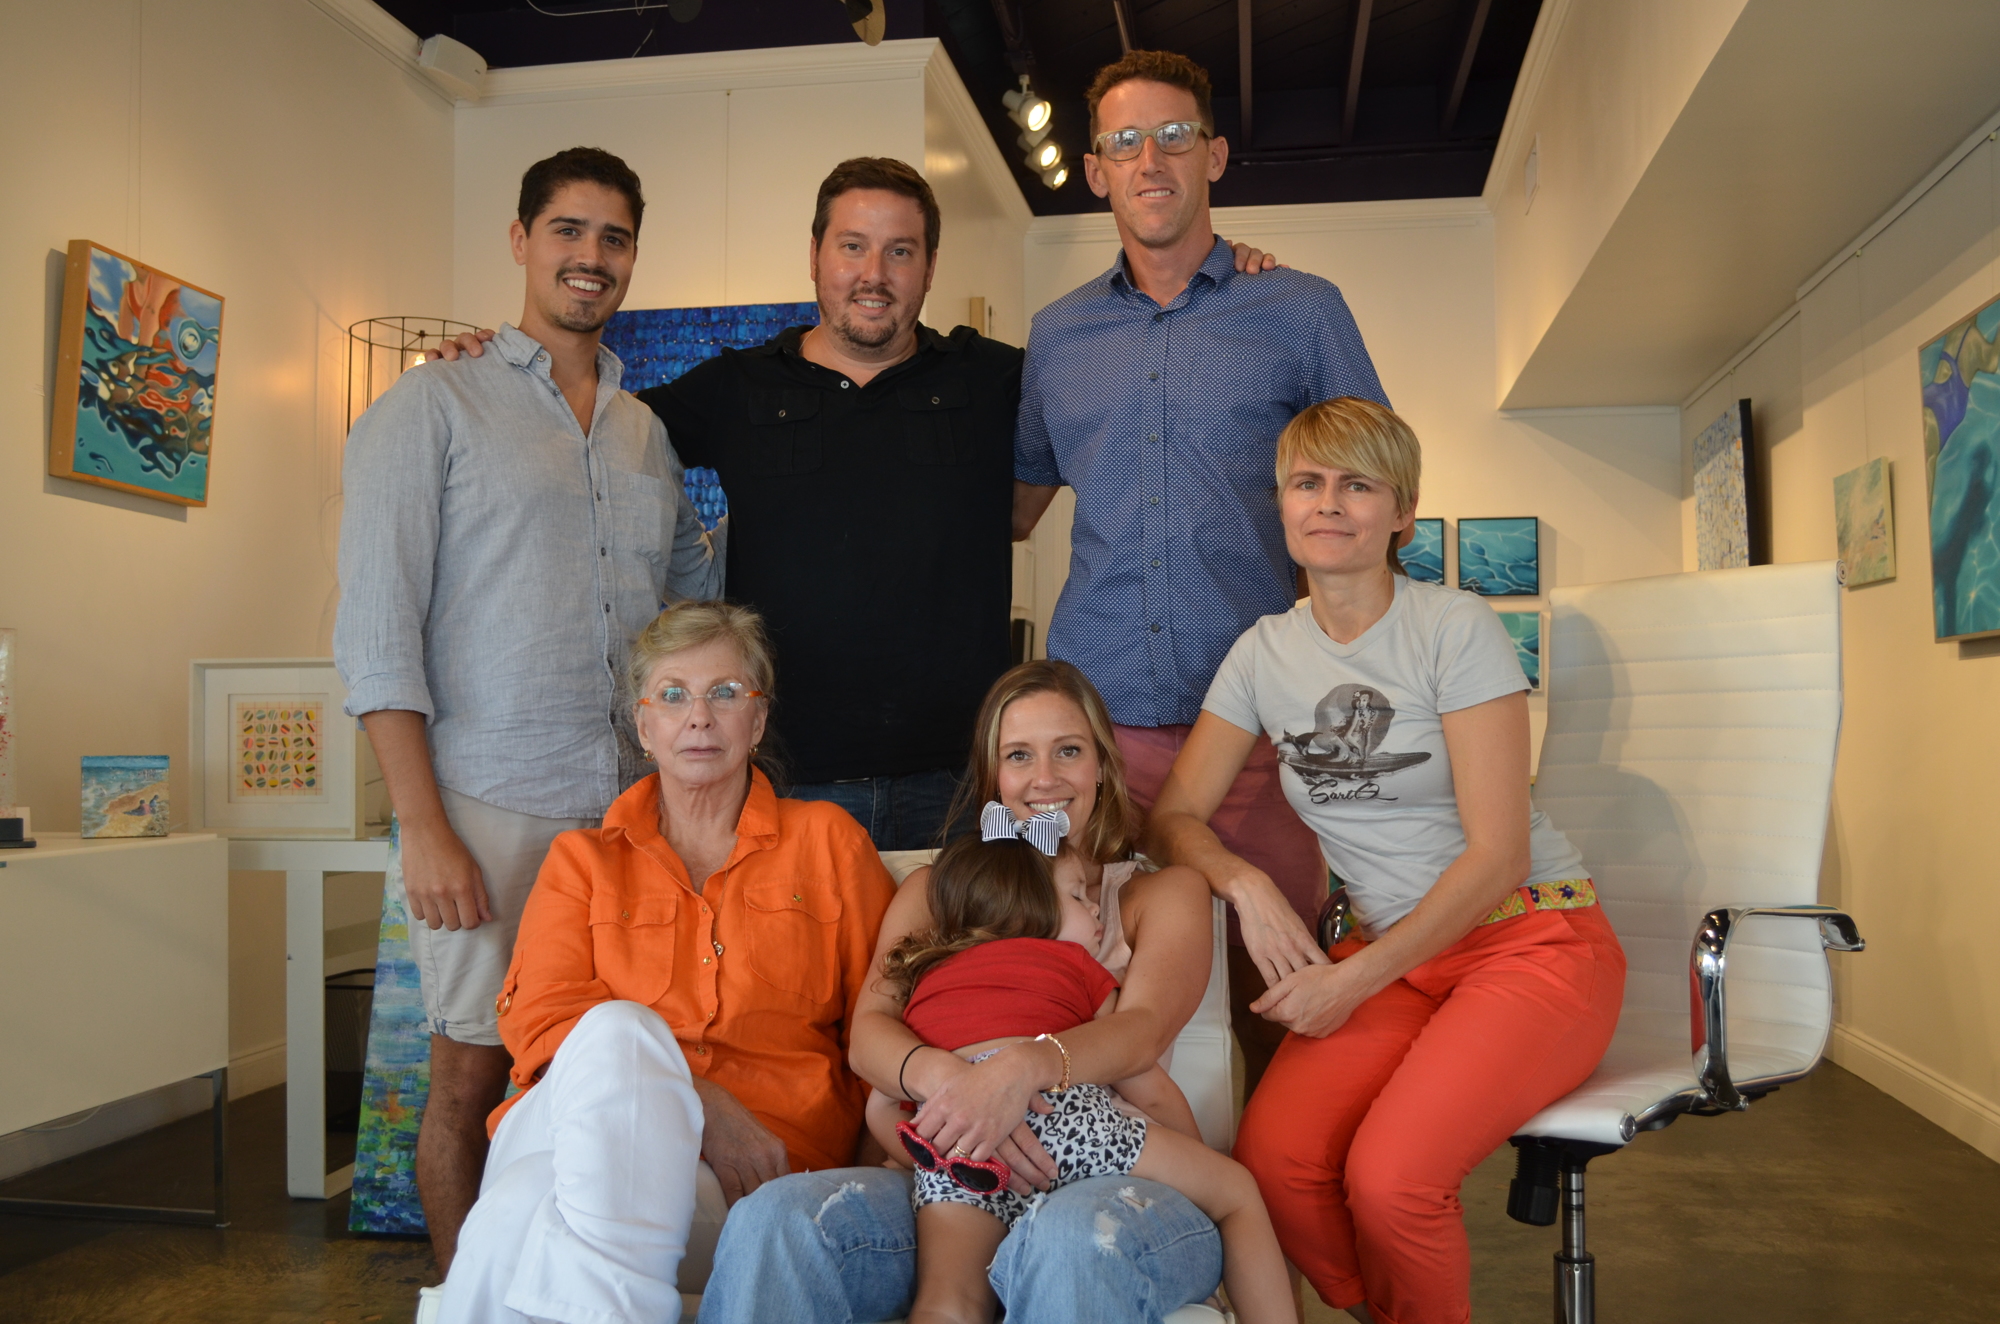 Rae Ramos, Tim Jaeger, Steven Strenk, Vicky Randall, Casia Kite with her and Jaeger’s daughter, Nina, and Laine Nixon